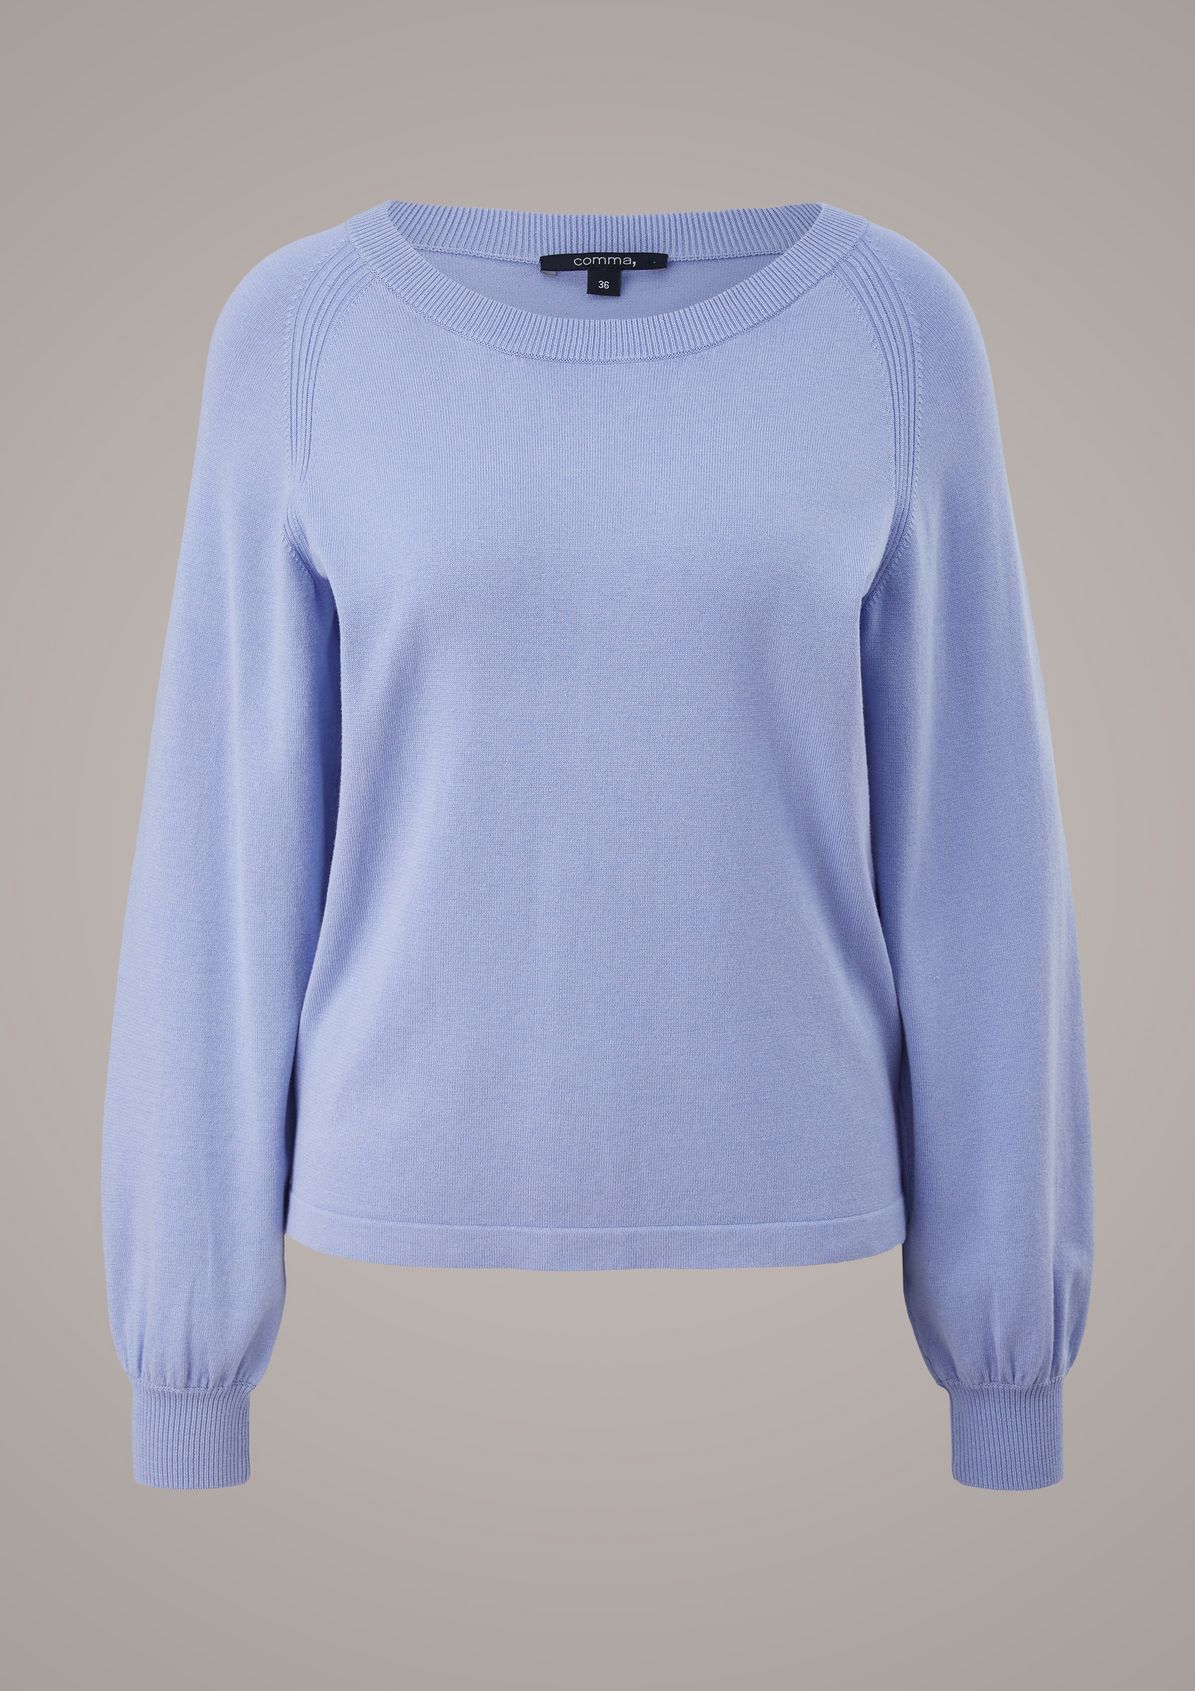 Soft fine knit jumper from comma